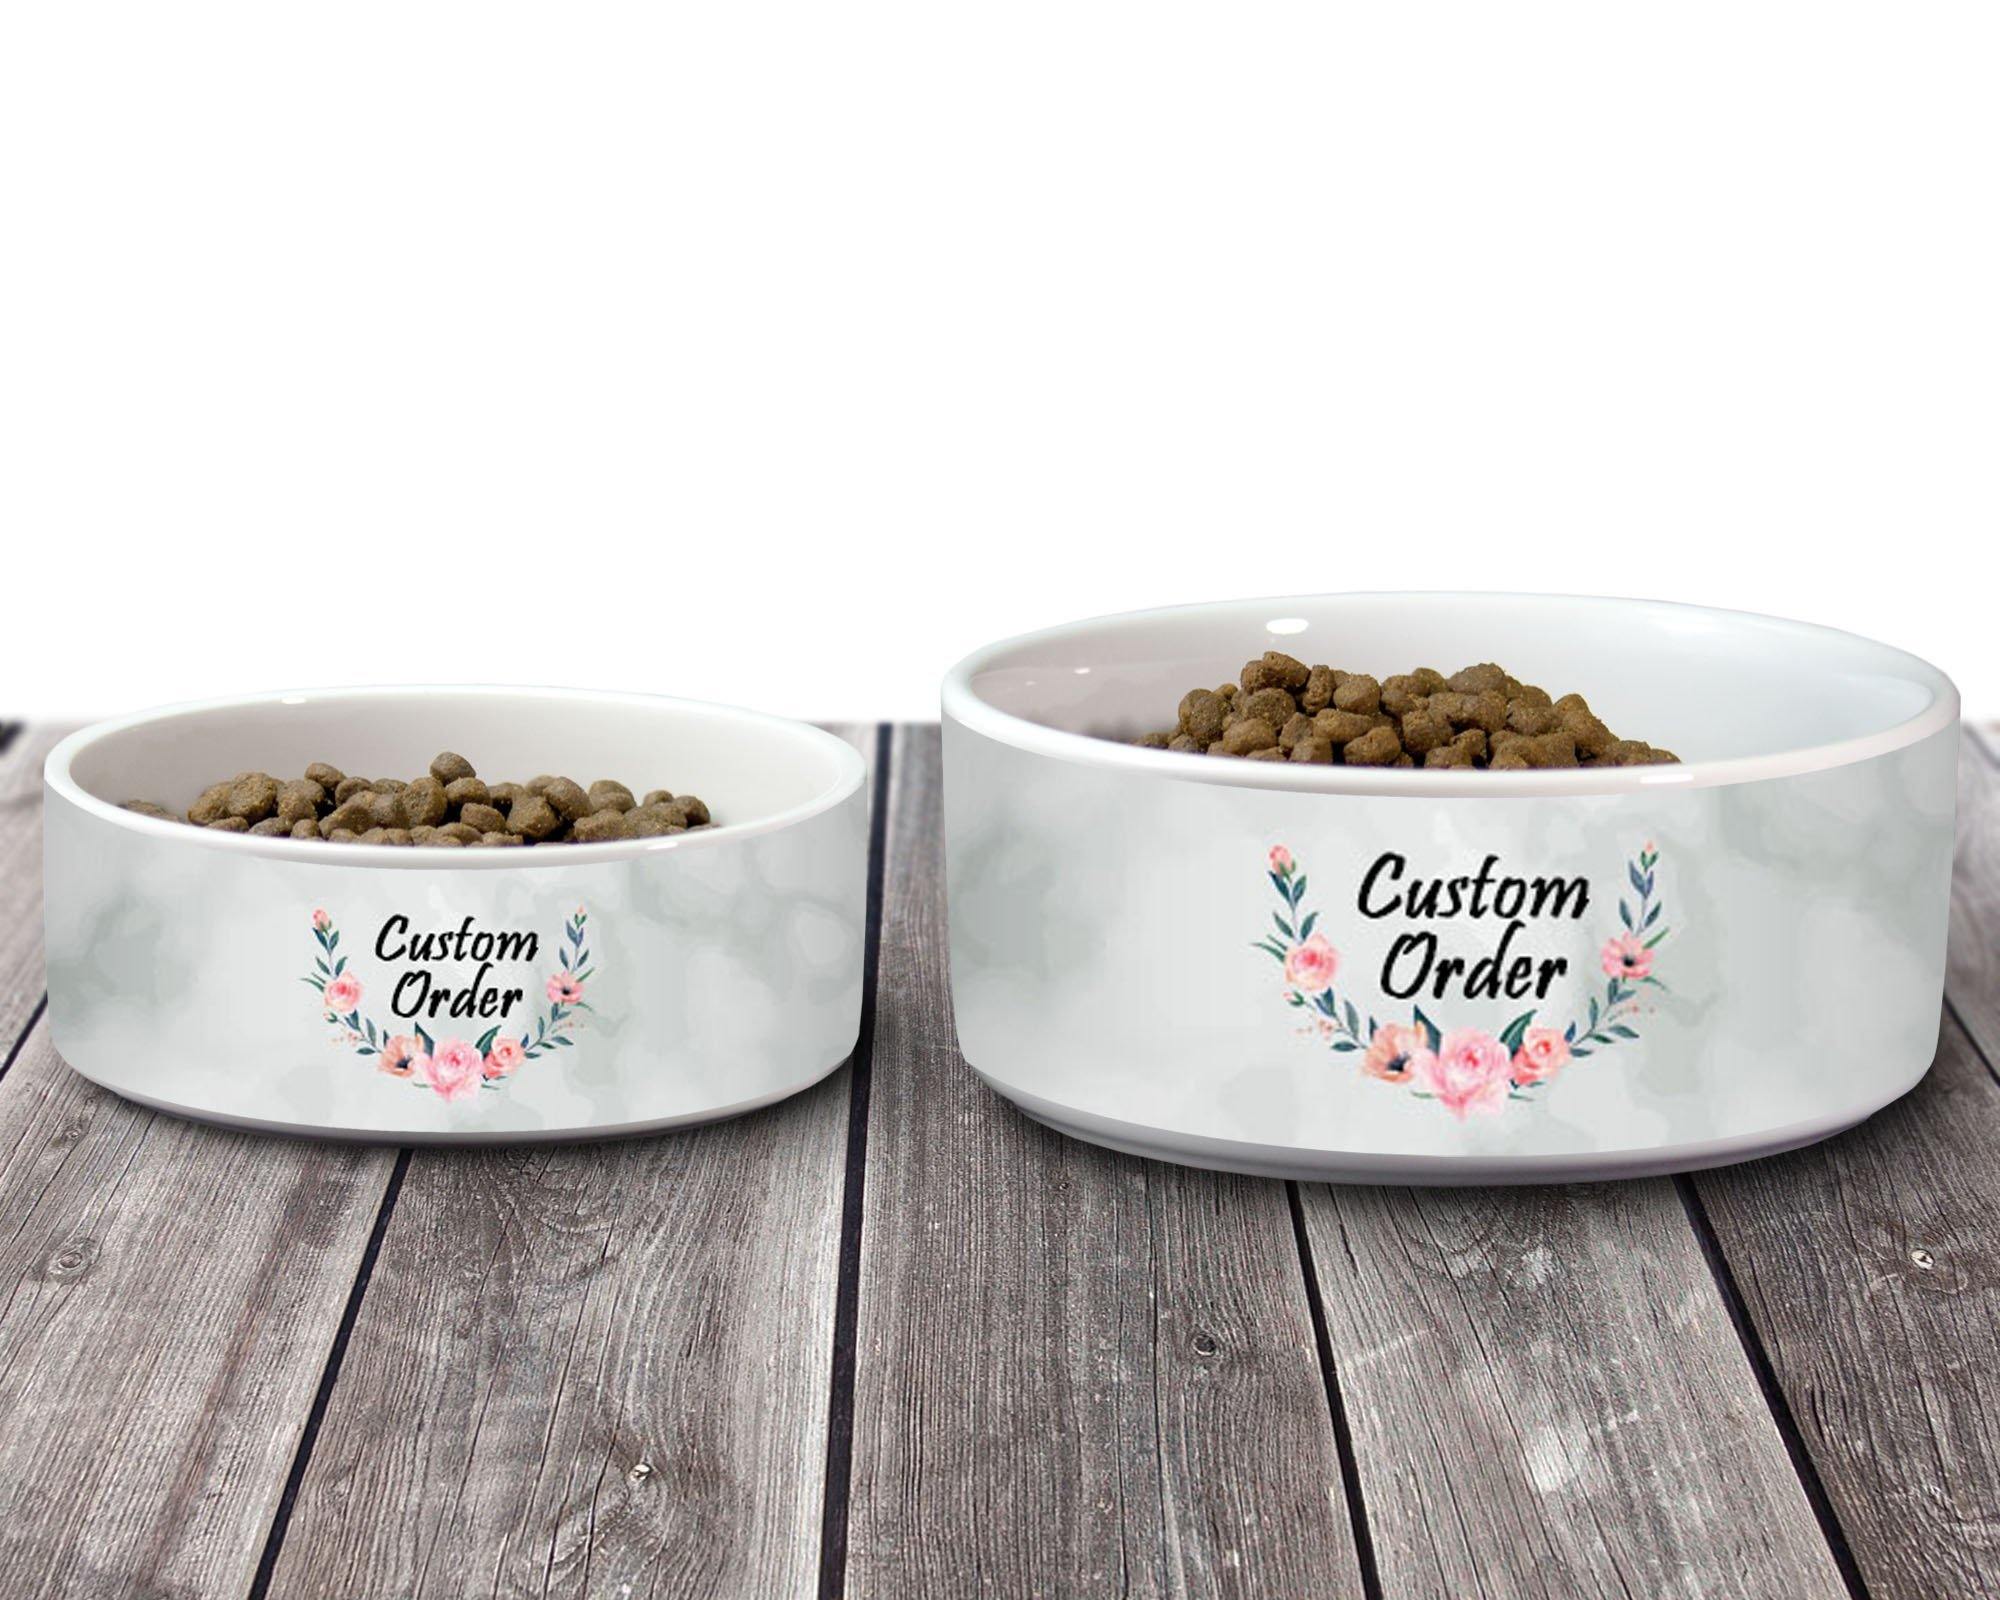 Personalized Pet Bowls | Custom Pet Bowls | Pet Accessories | Custom Order - This & That Solutions - Personalized Pet Bowls | Custom Pet Bowls | Pet Accessories | Custom Order - Personalized Gifts & Custom Home Decor